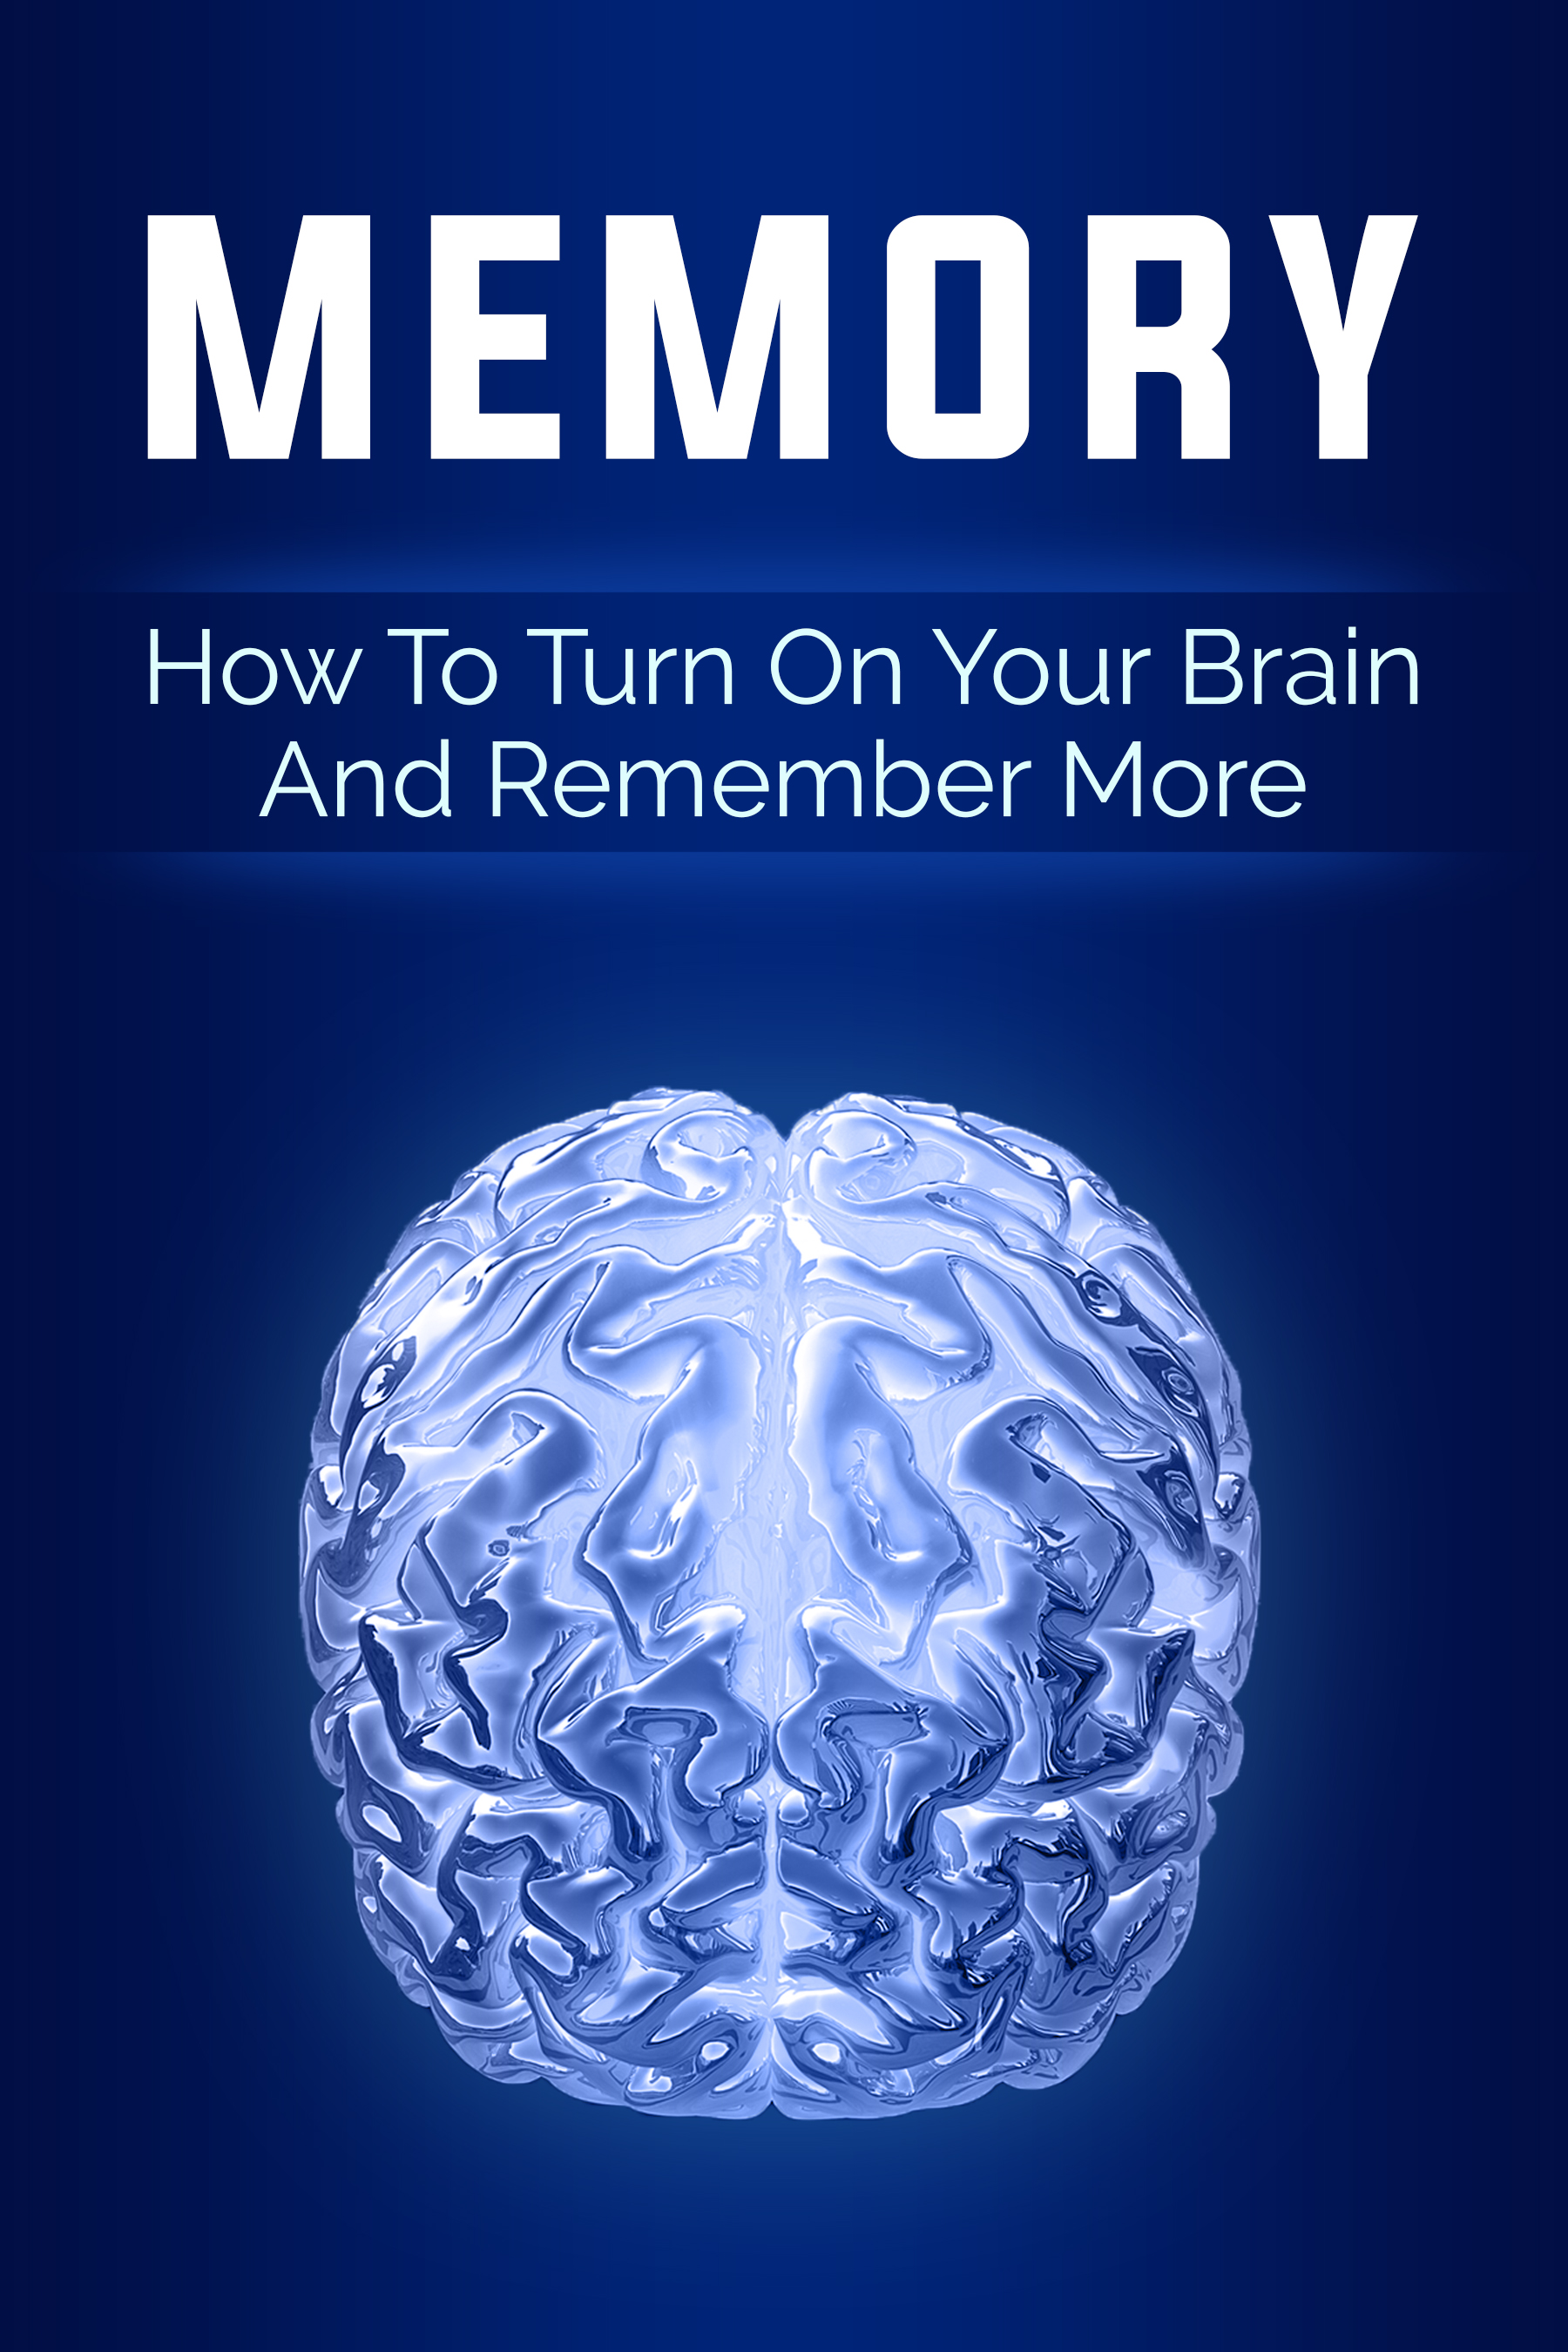 FREE: Memory how to turn your brain on and remember more by Chris almer